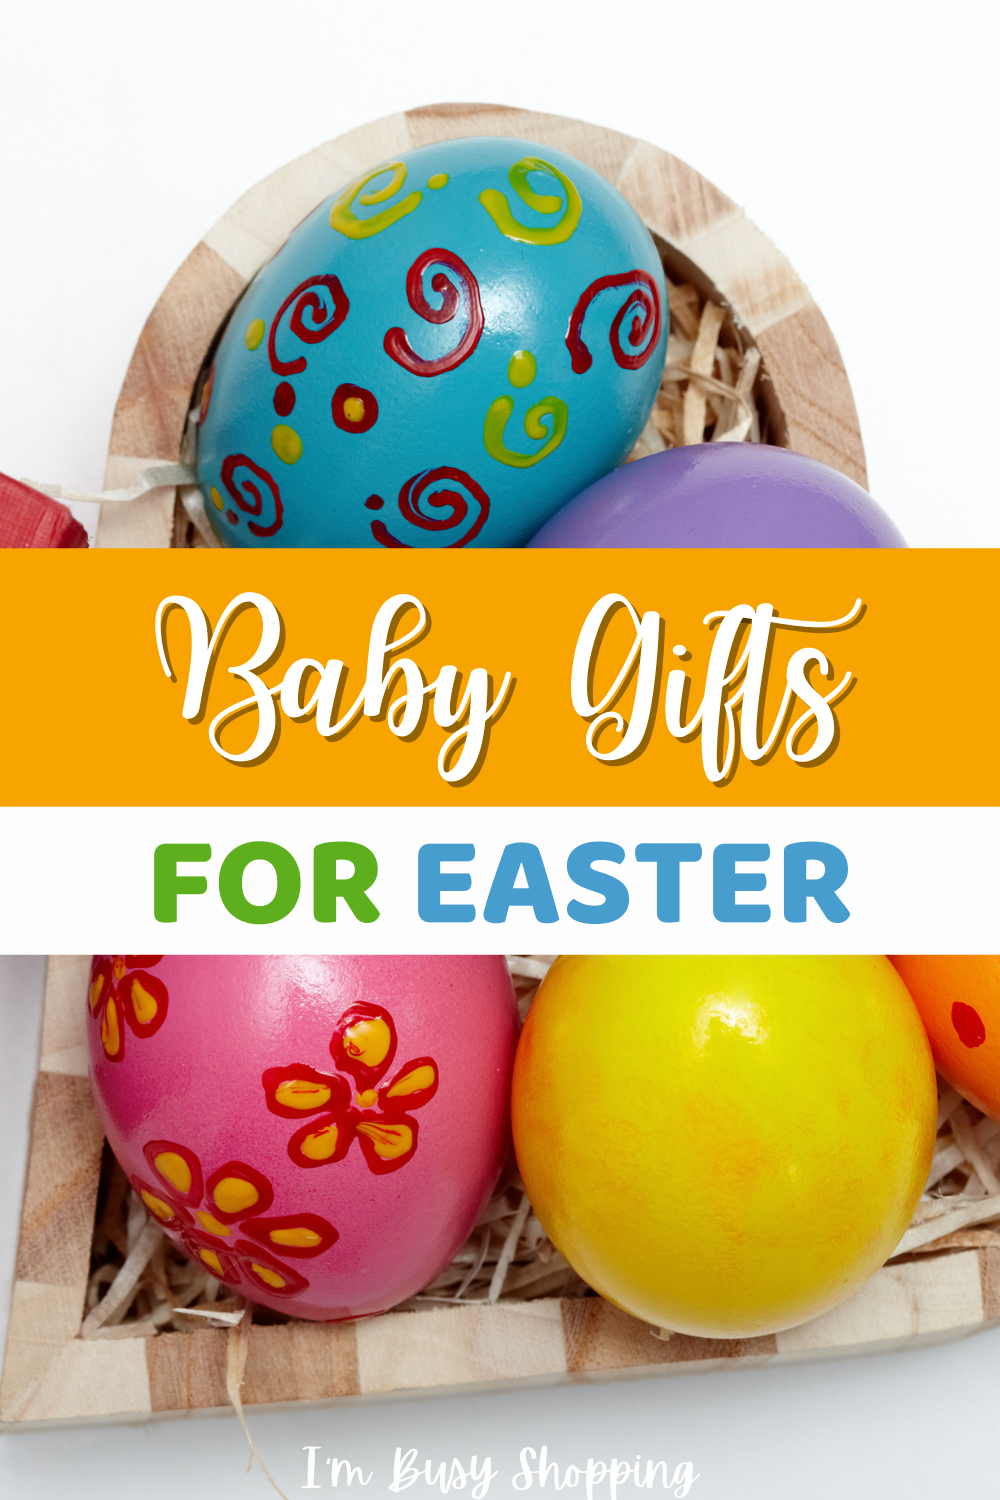 Pin showing Baby Gifts for Easter